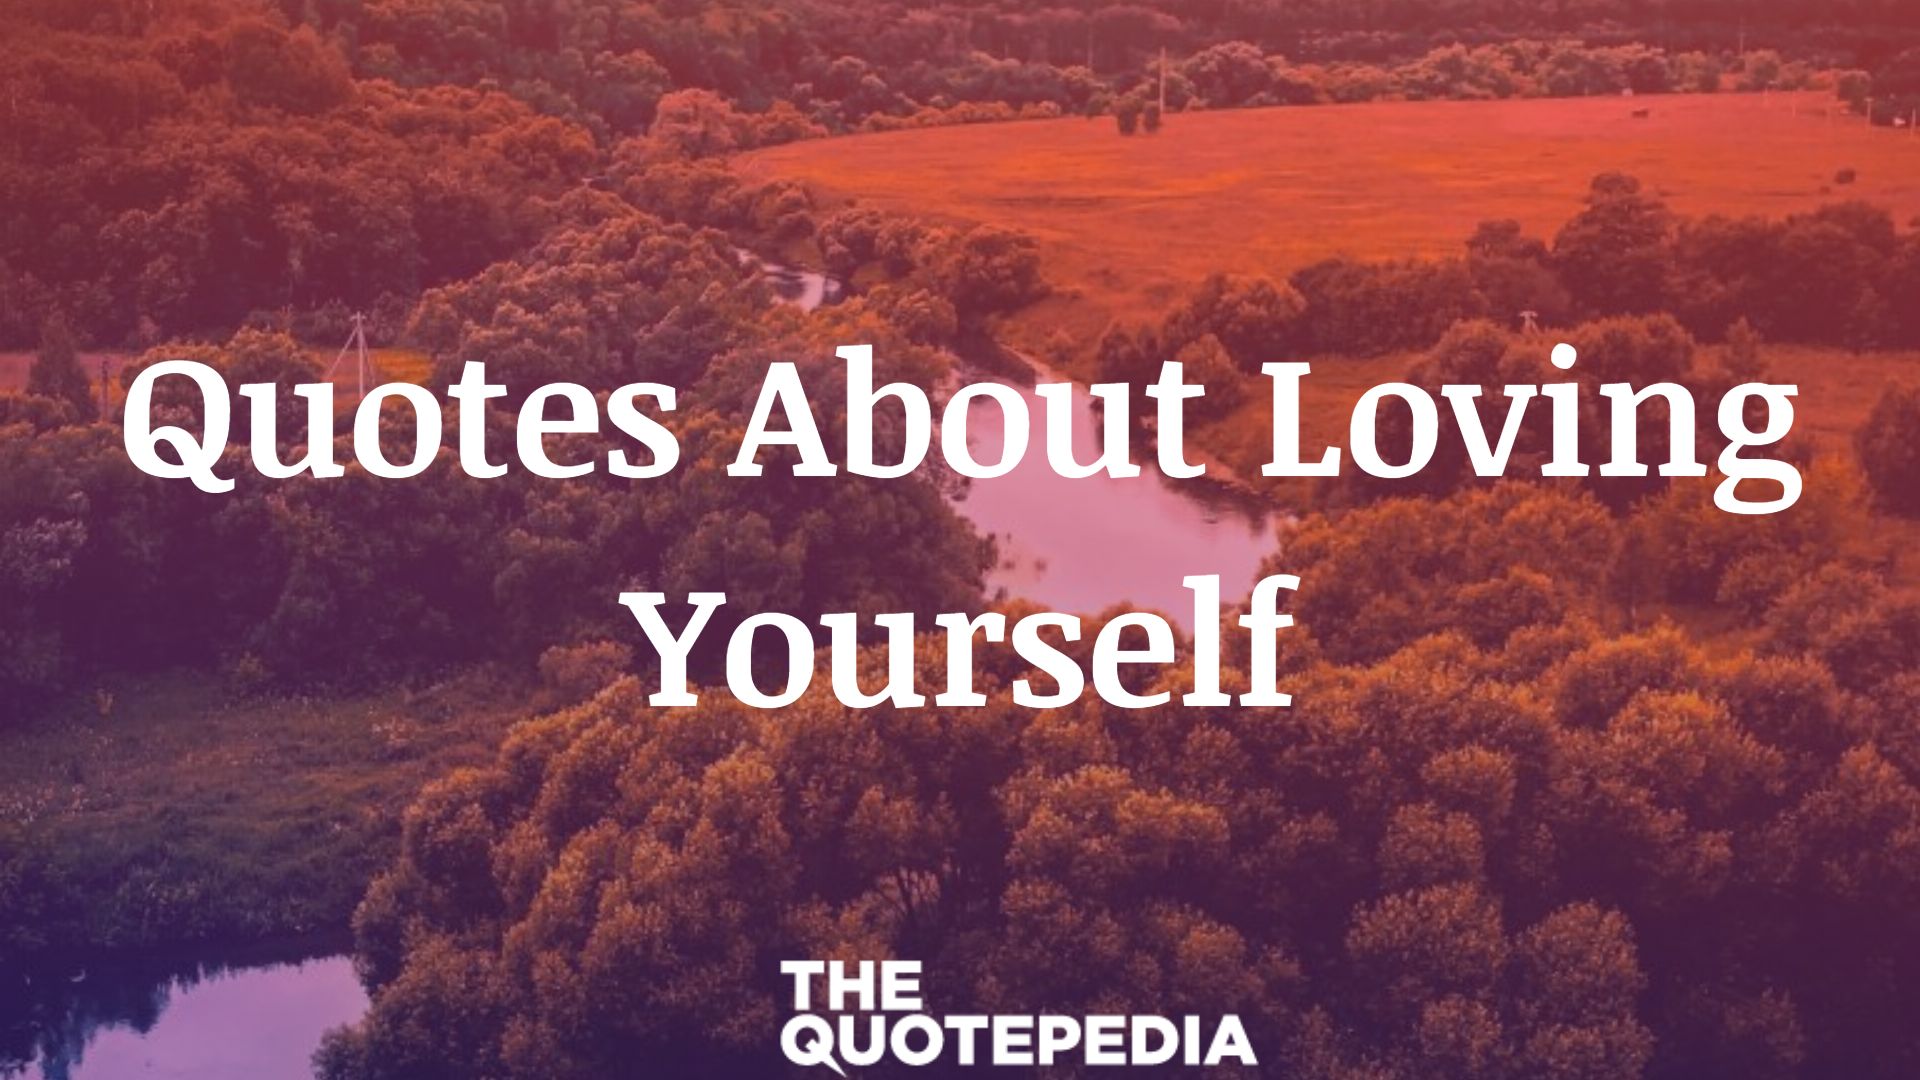 Quotes About Loving Yourself